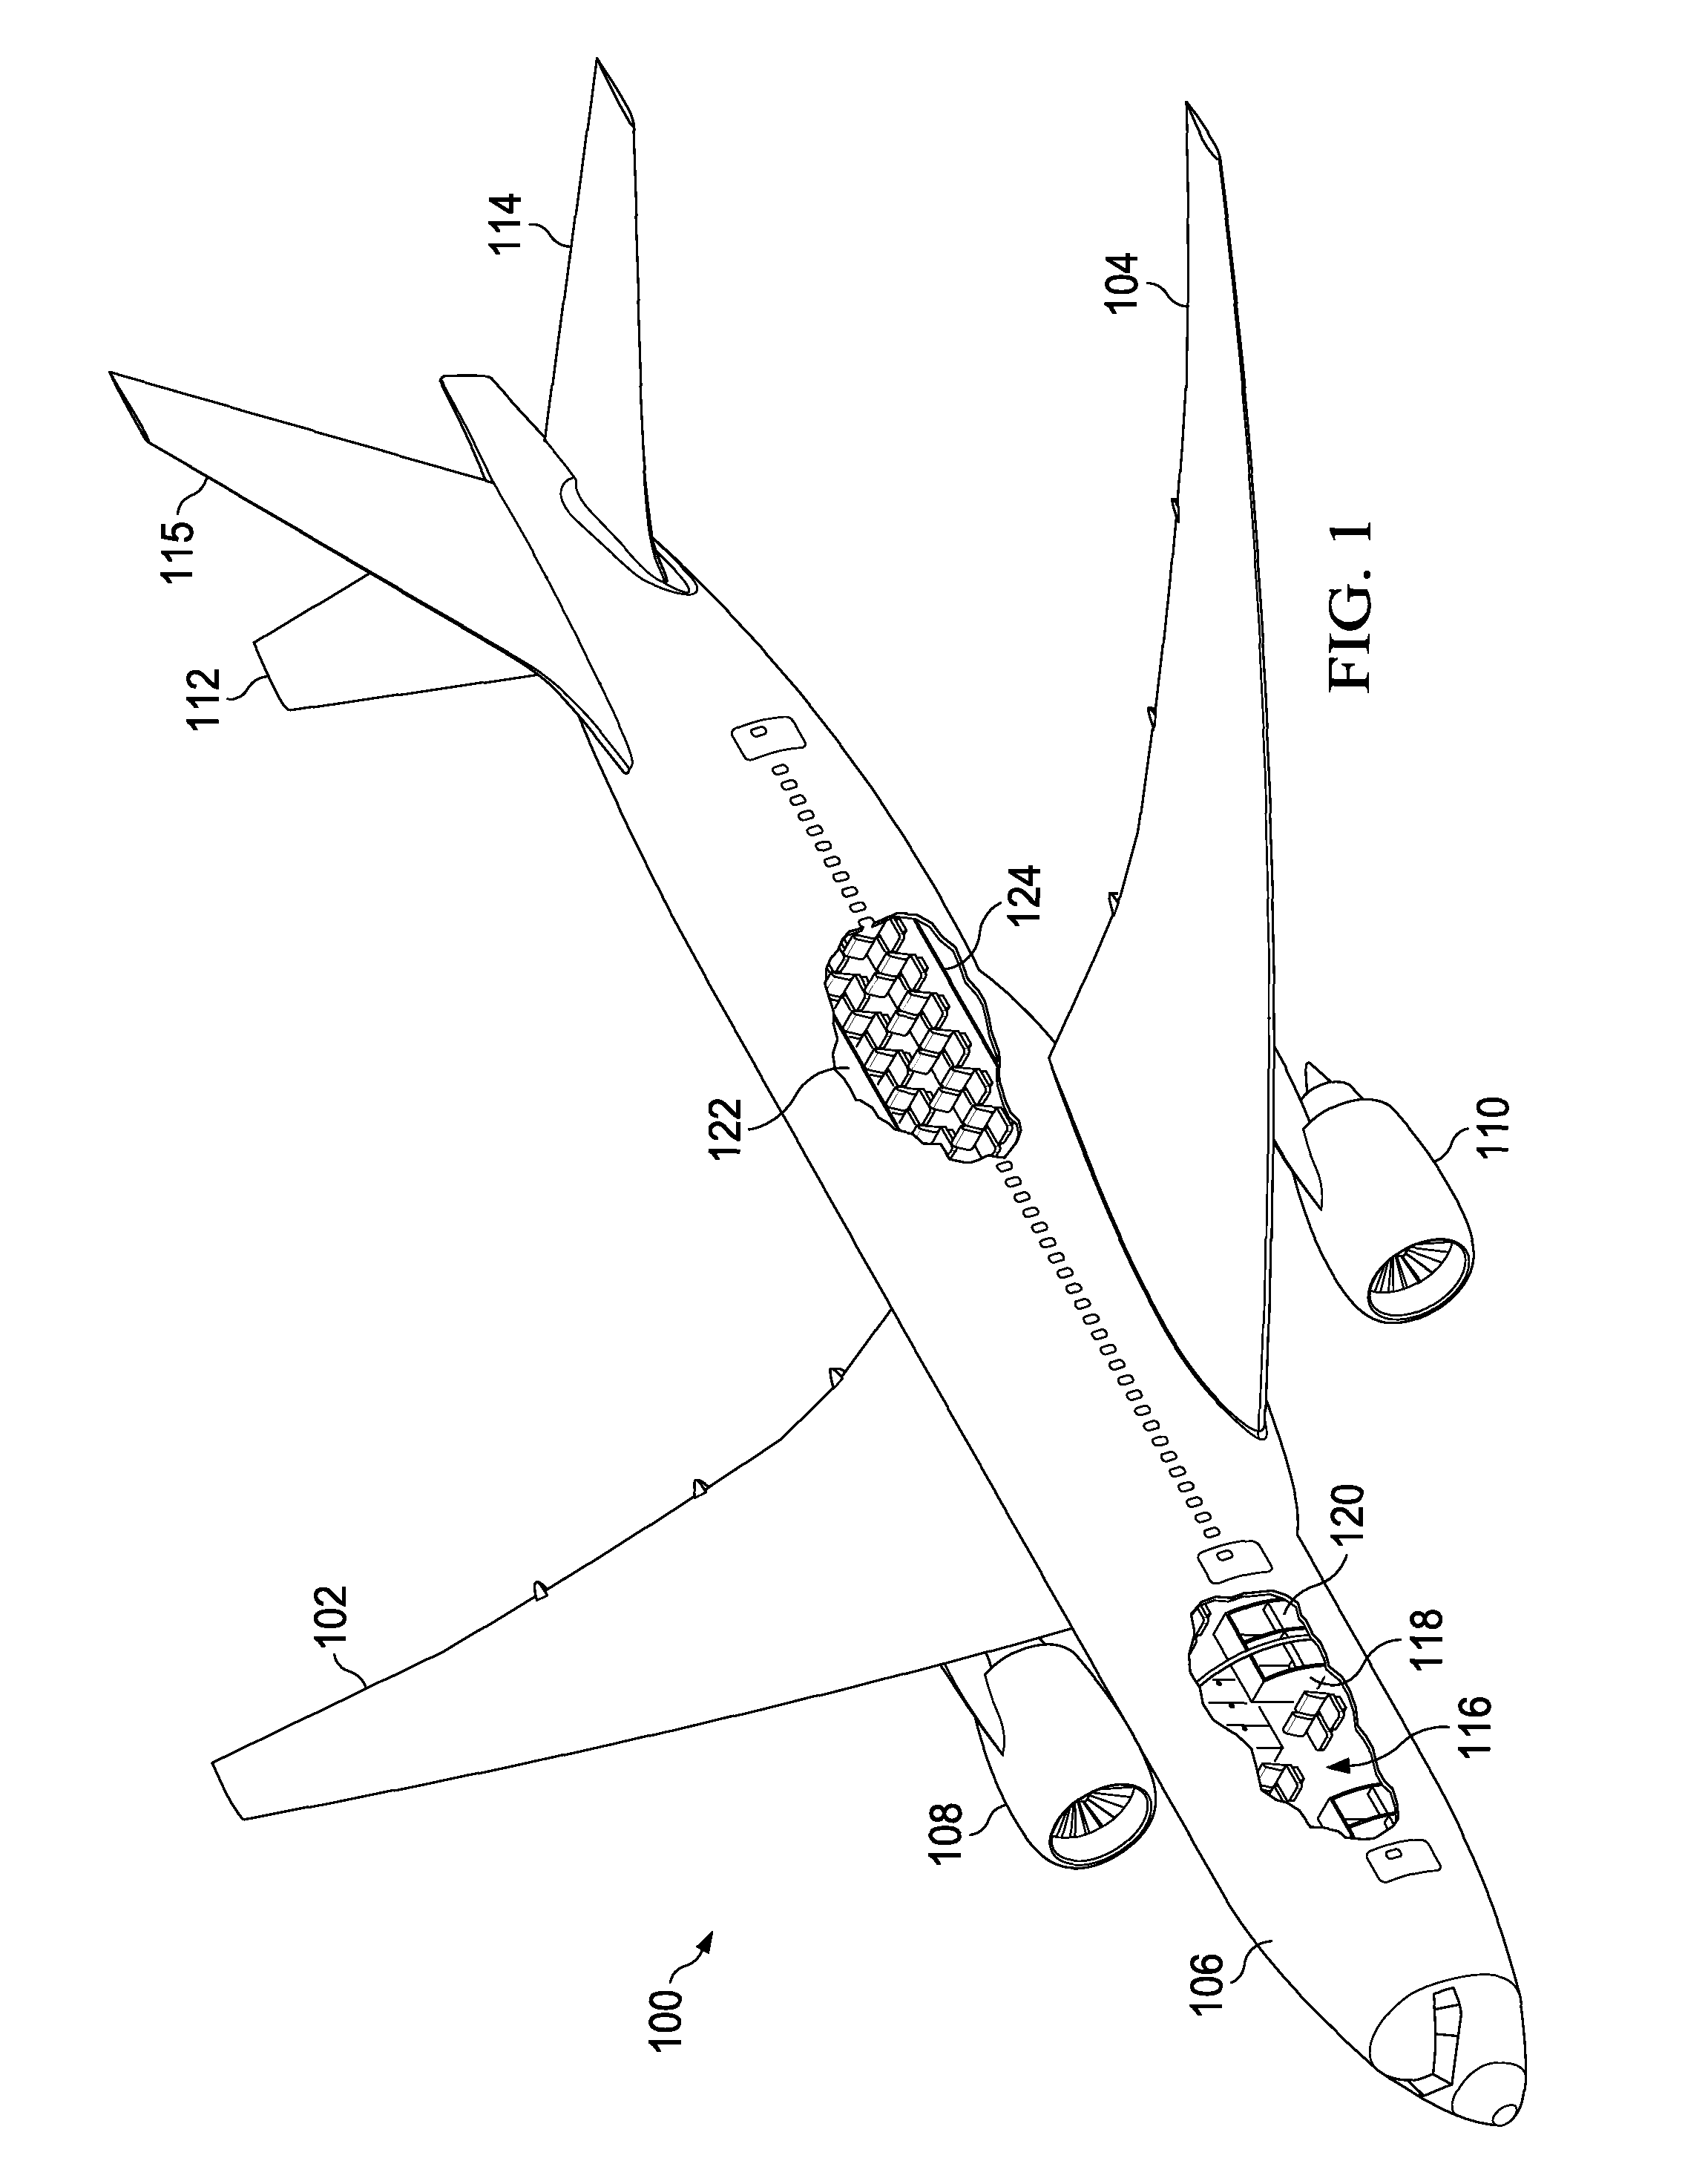 Noise reduction system for composite structures